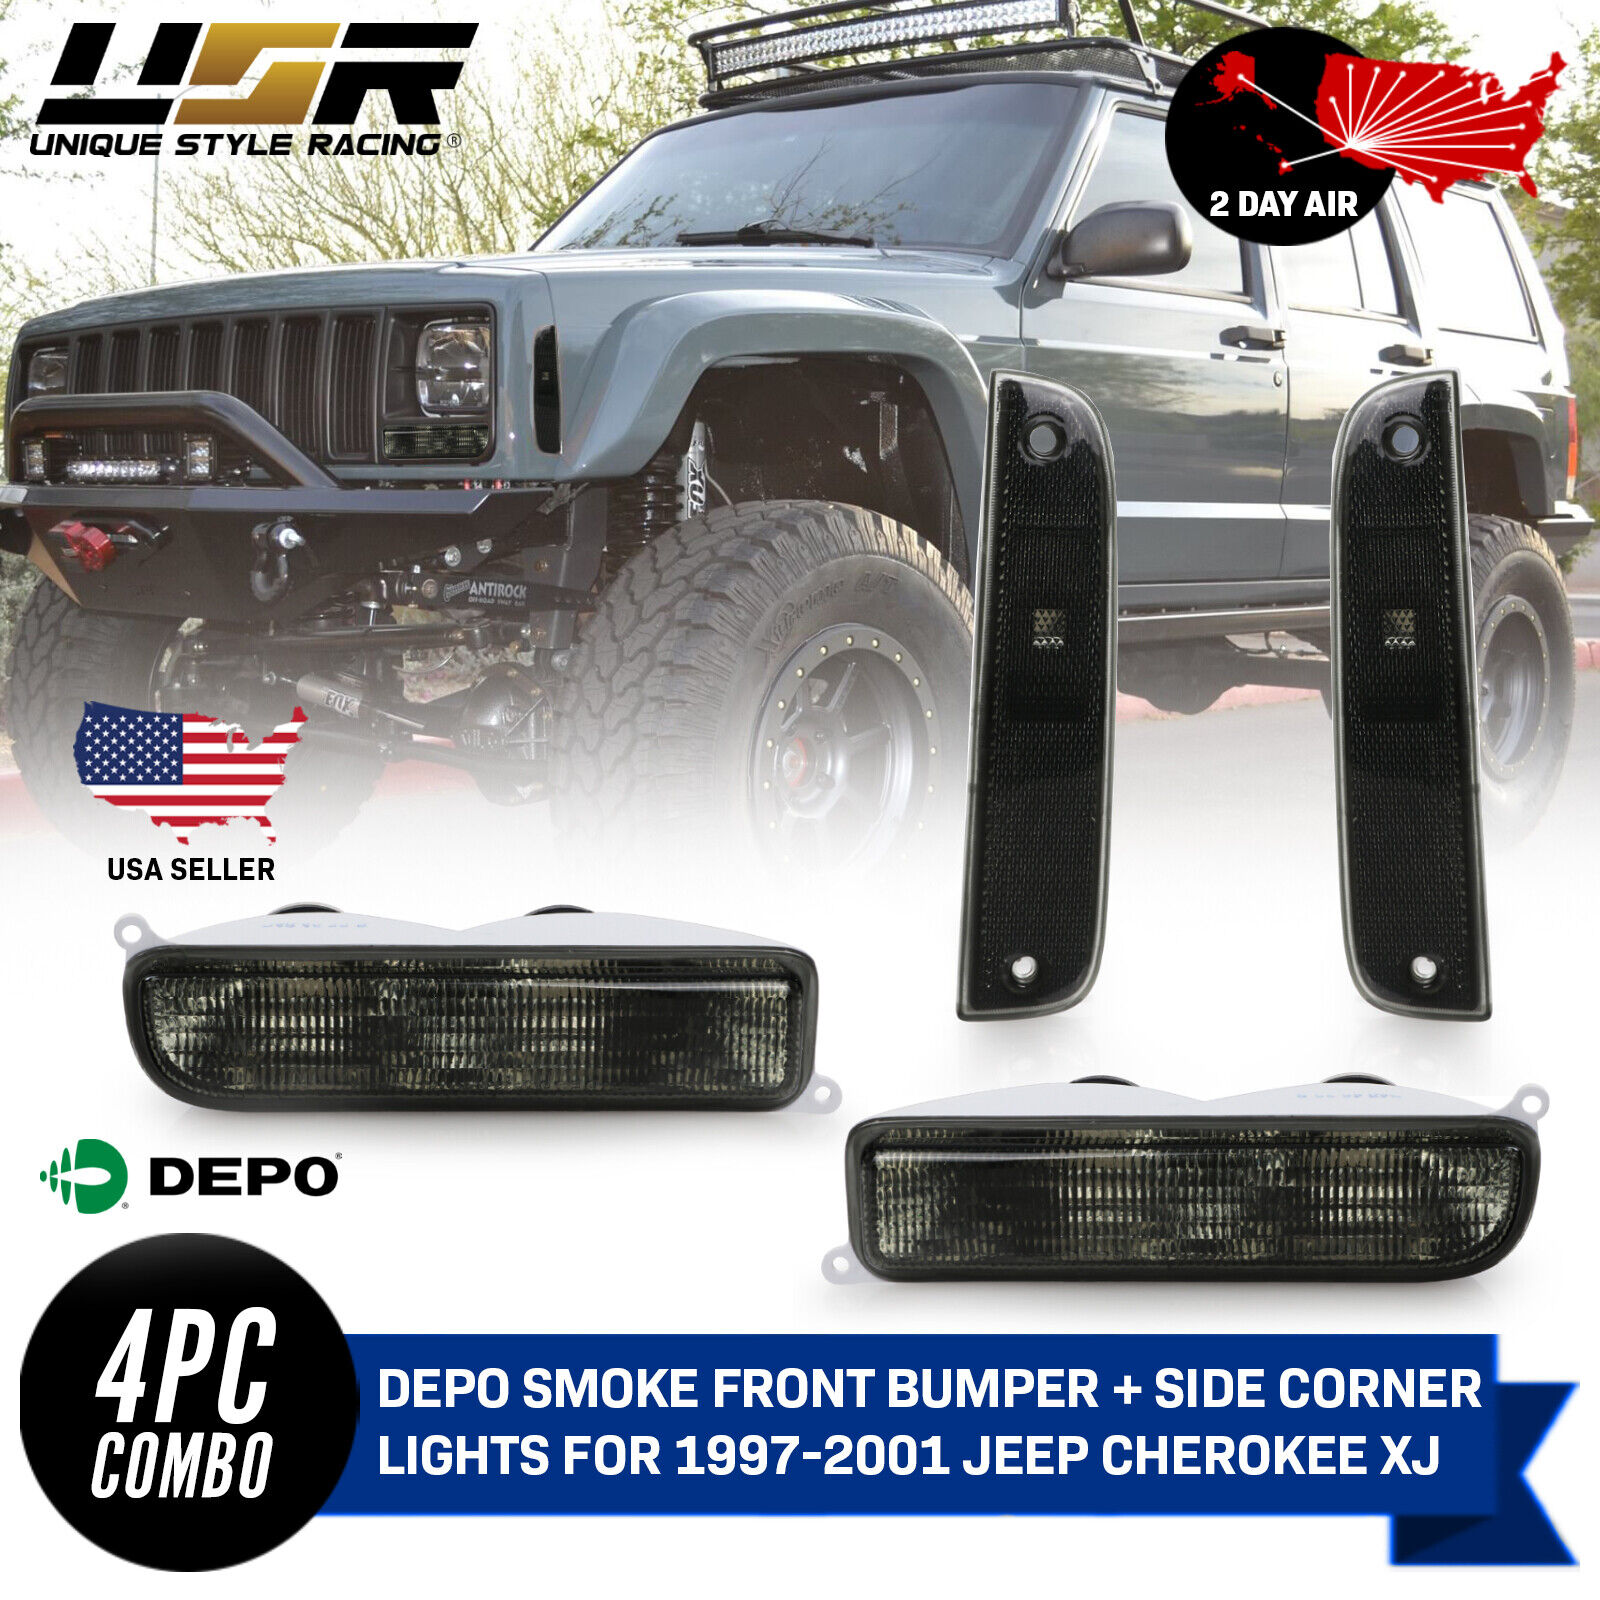 2nd Day Air DEPO Smoke Front Corner + Bumper Signal Lights For 97-01 Cherokee XJ